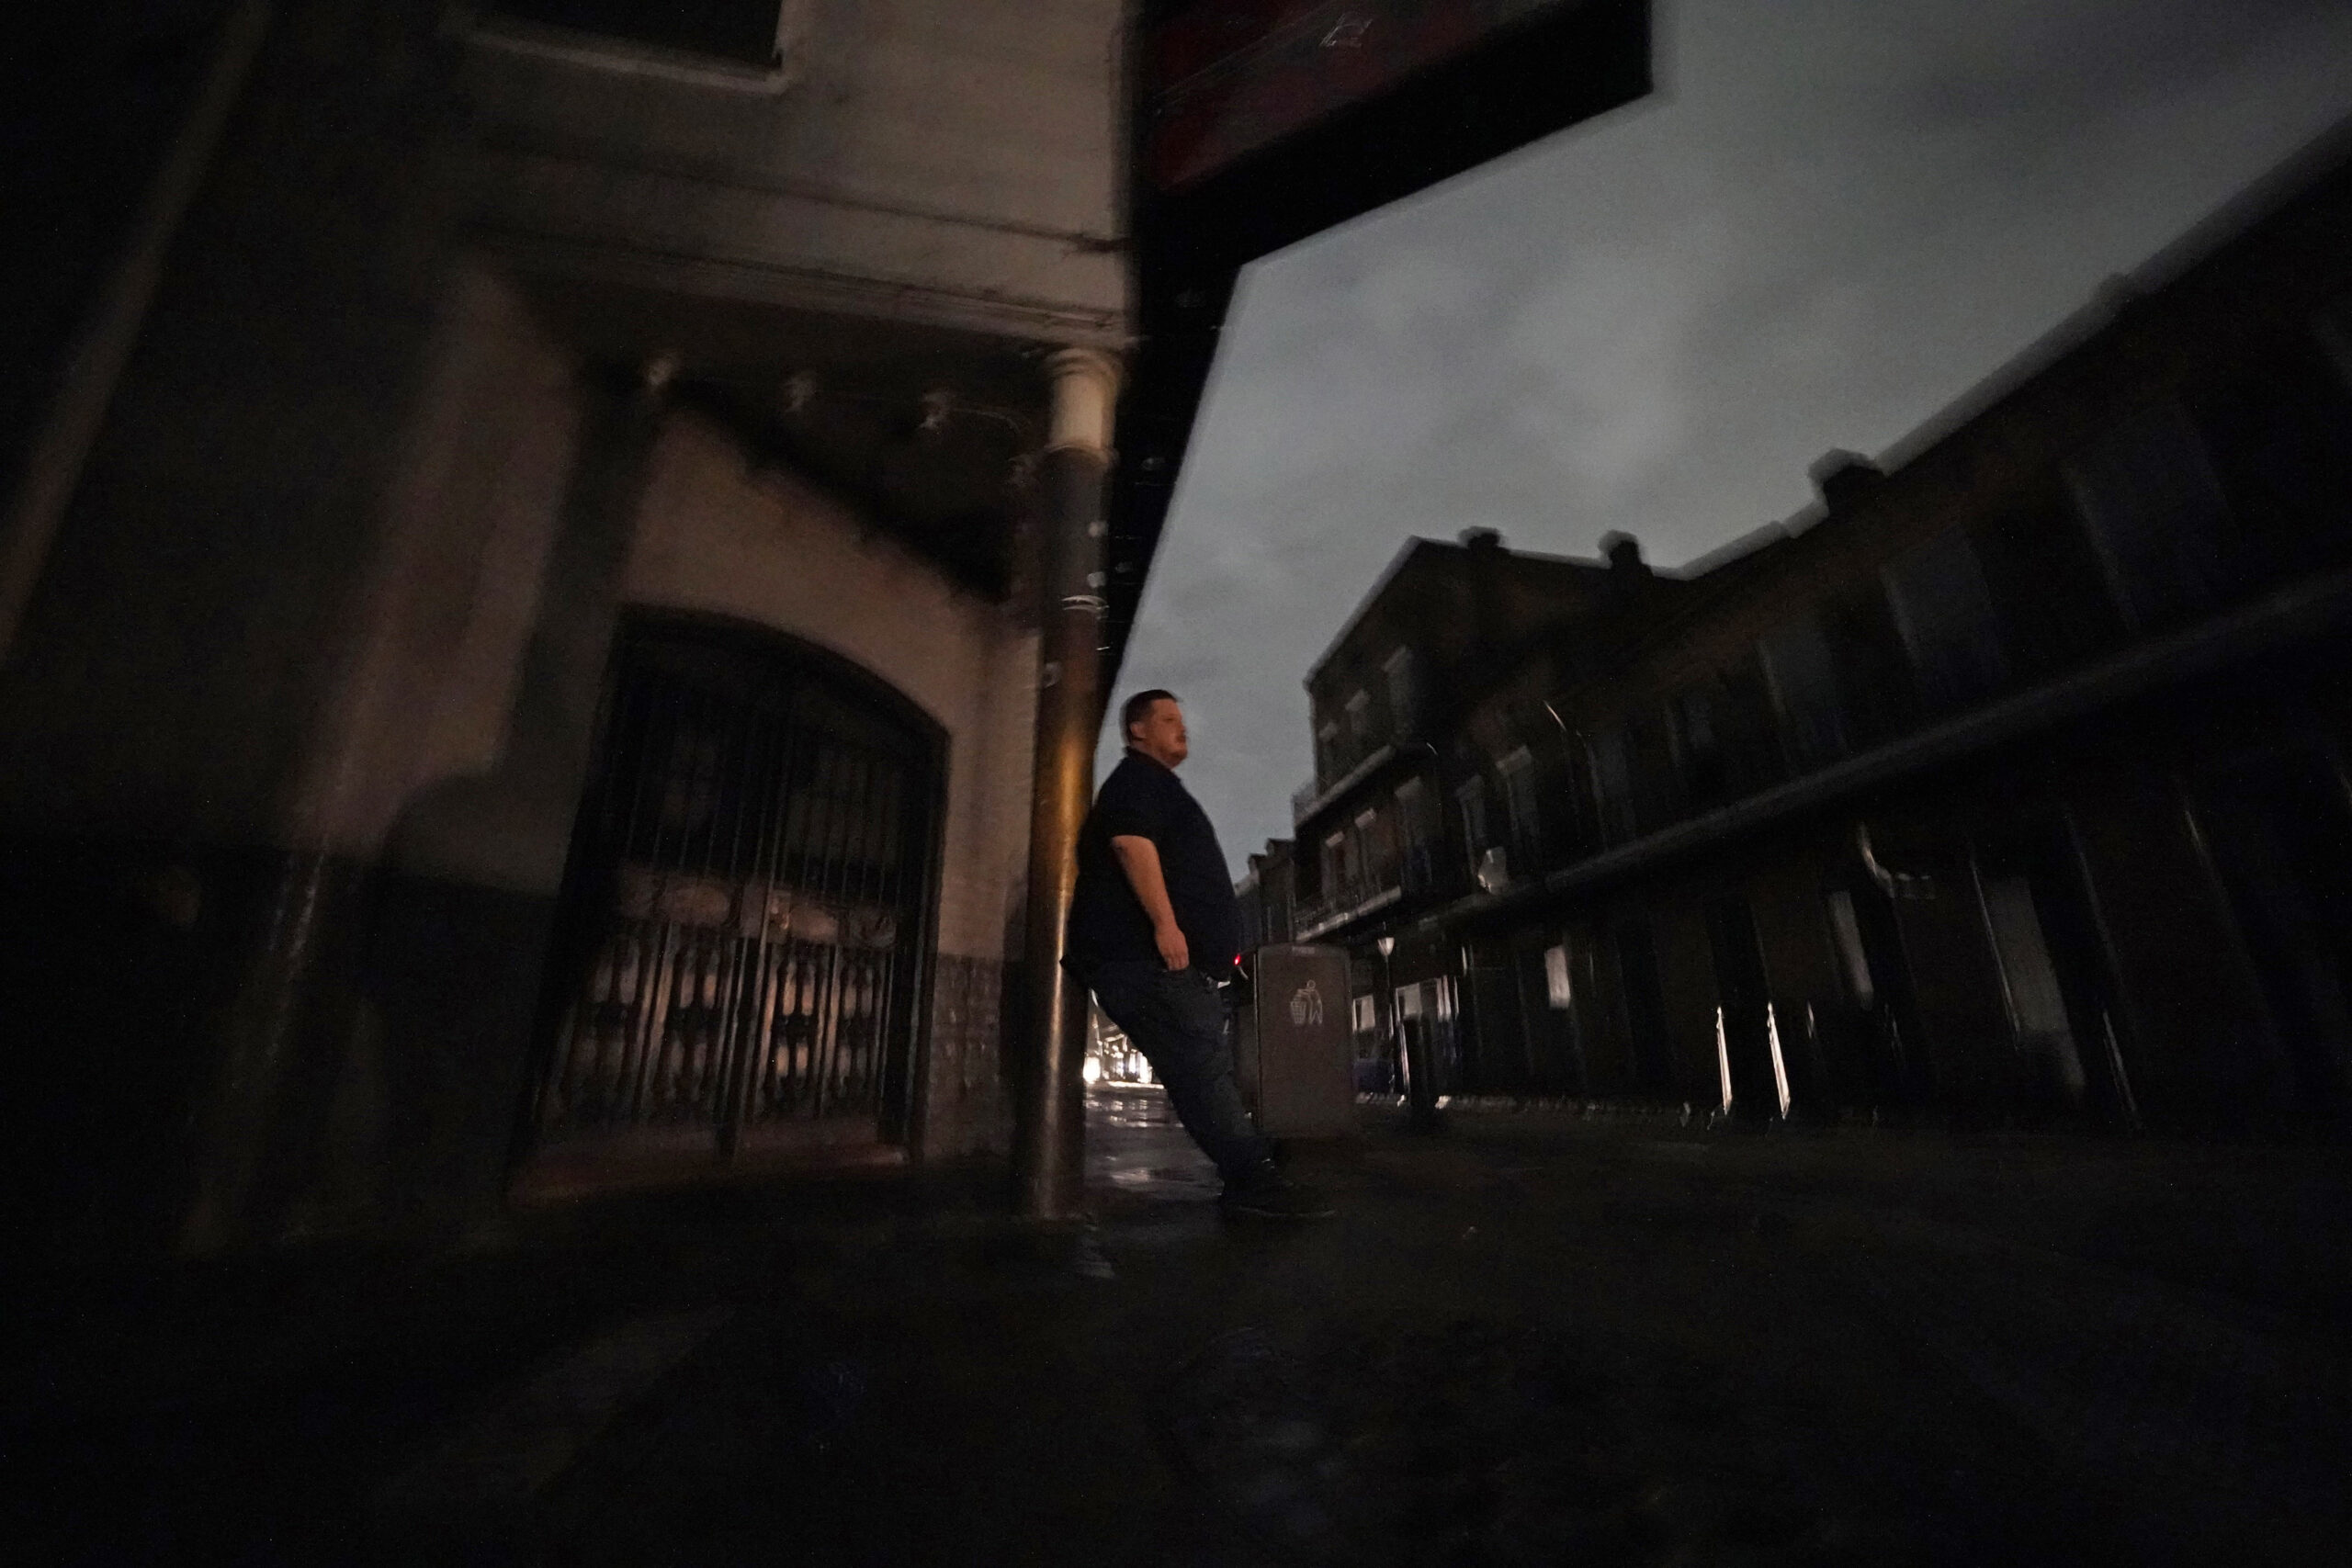 Greg Nazarko, manager of the Bourbon Bandstand bar on Bourbon Street, leans against a pole outside the club where he rode out Hurricane Ida that knocked out power in New Orleans, Monday, Aug. 30, 2021. (AP Photo/Gerald Herbert)